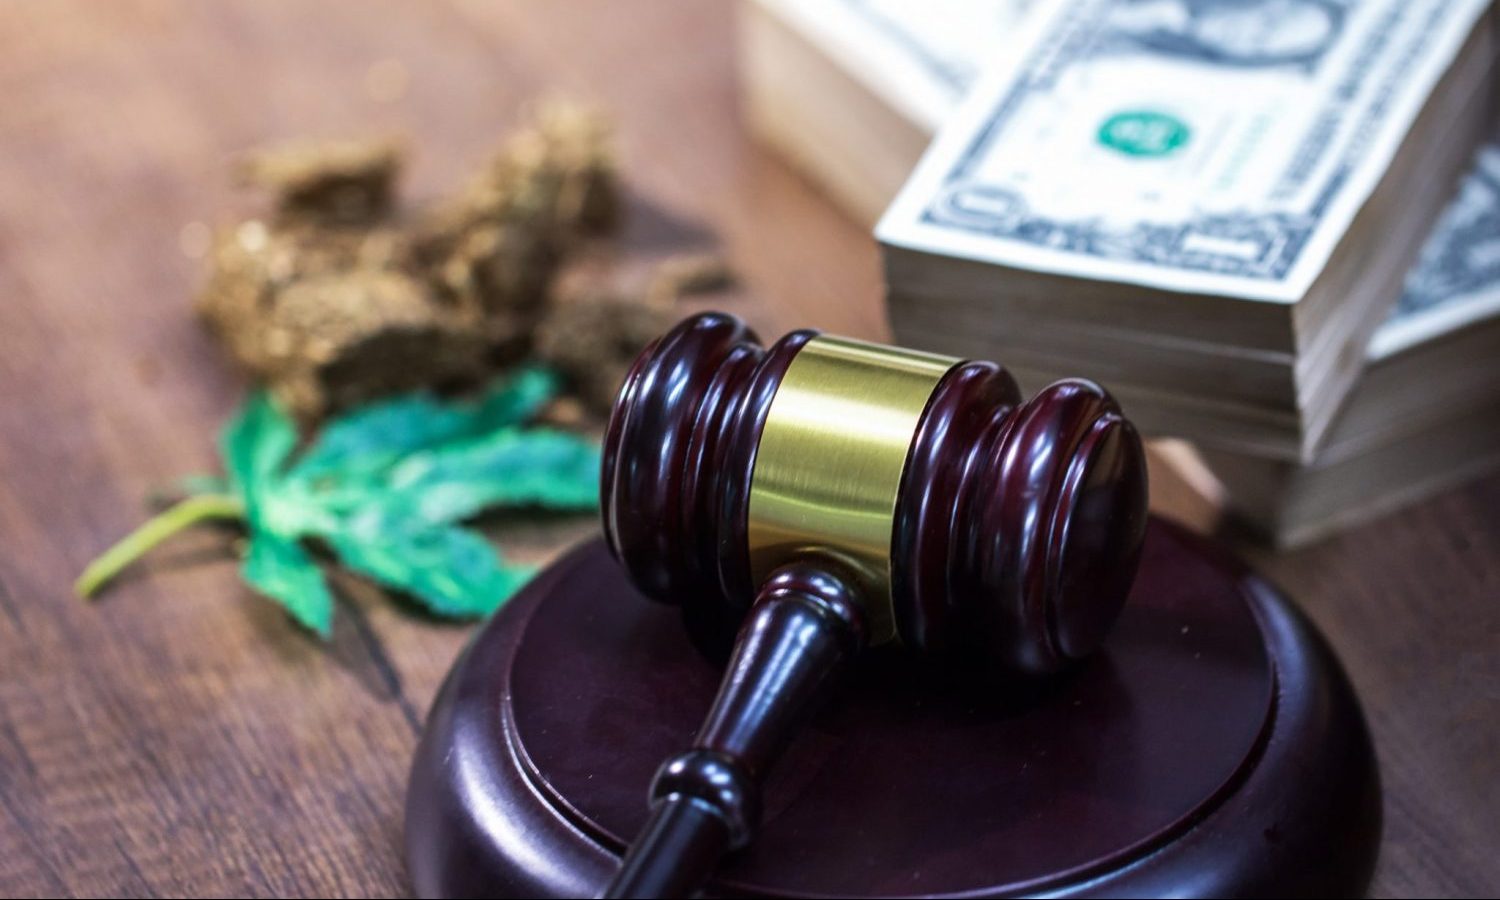 How the cannabis banking bill fares in the Senate will determine the future of national marijuana reform